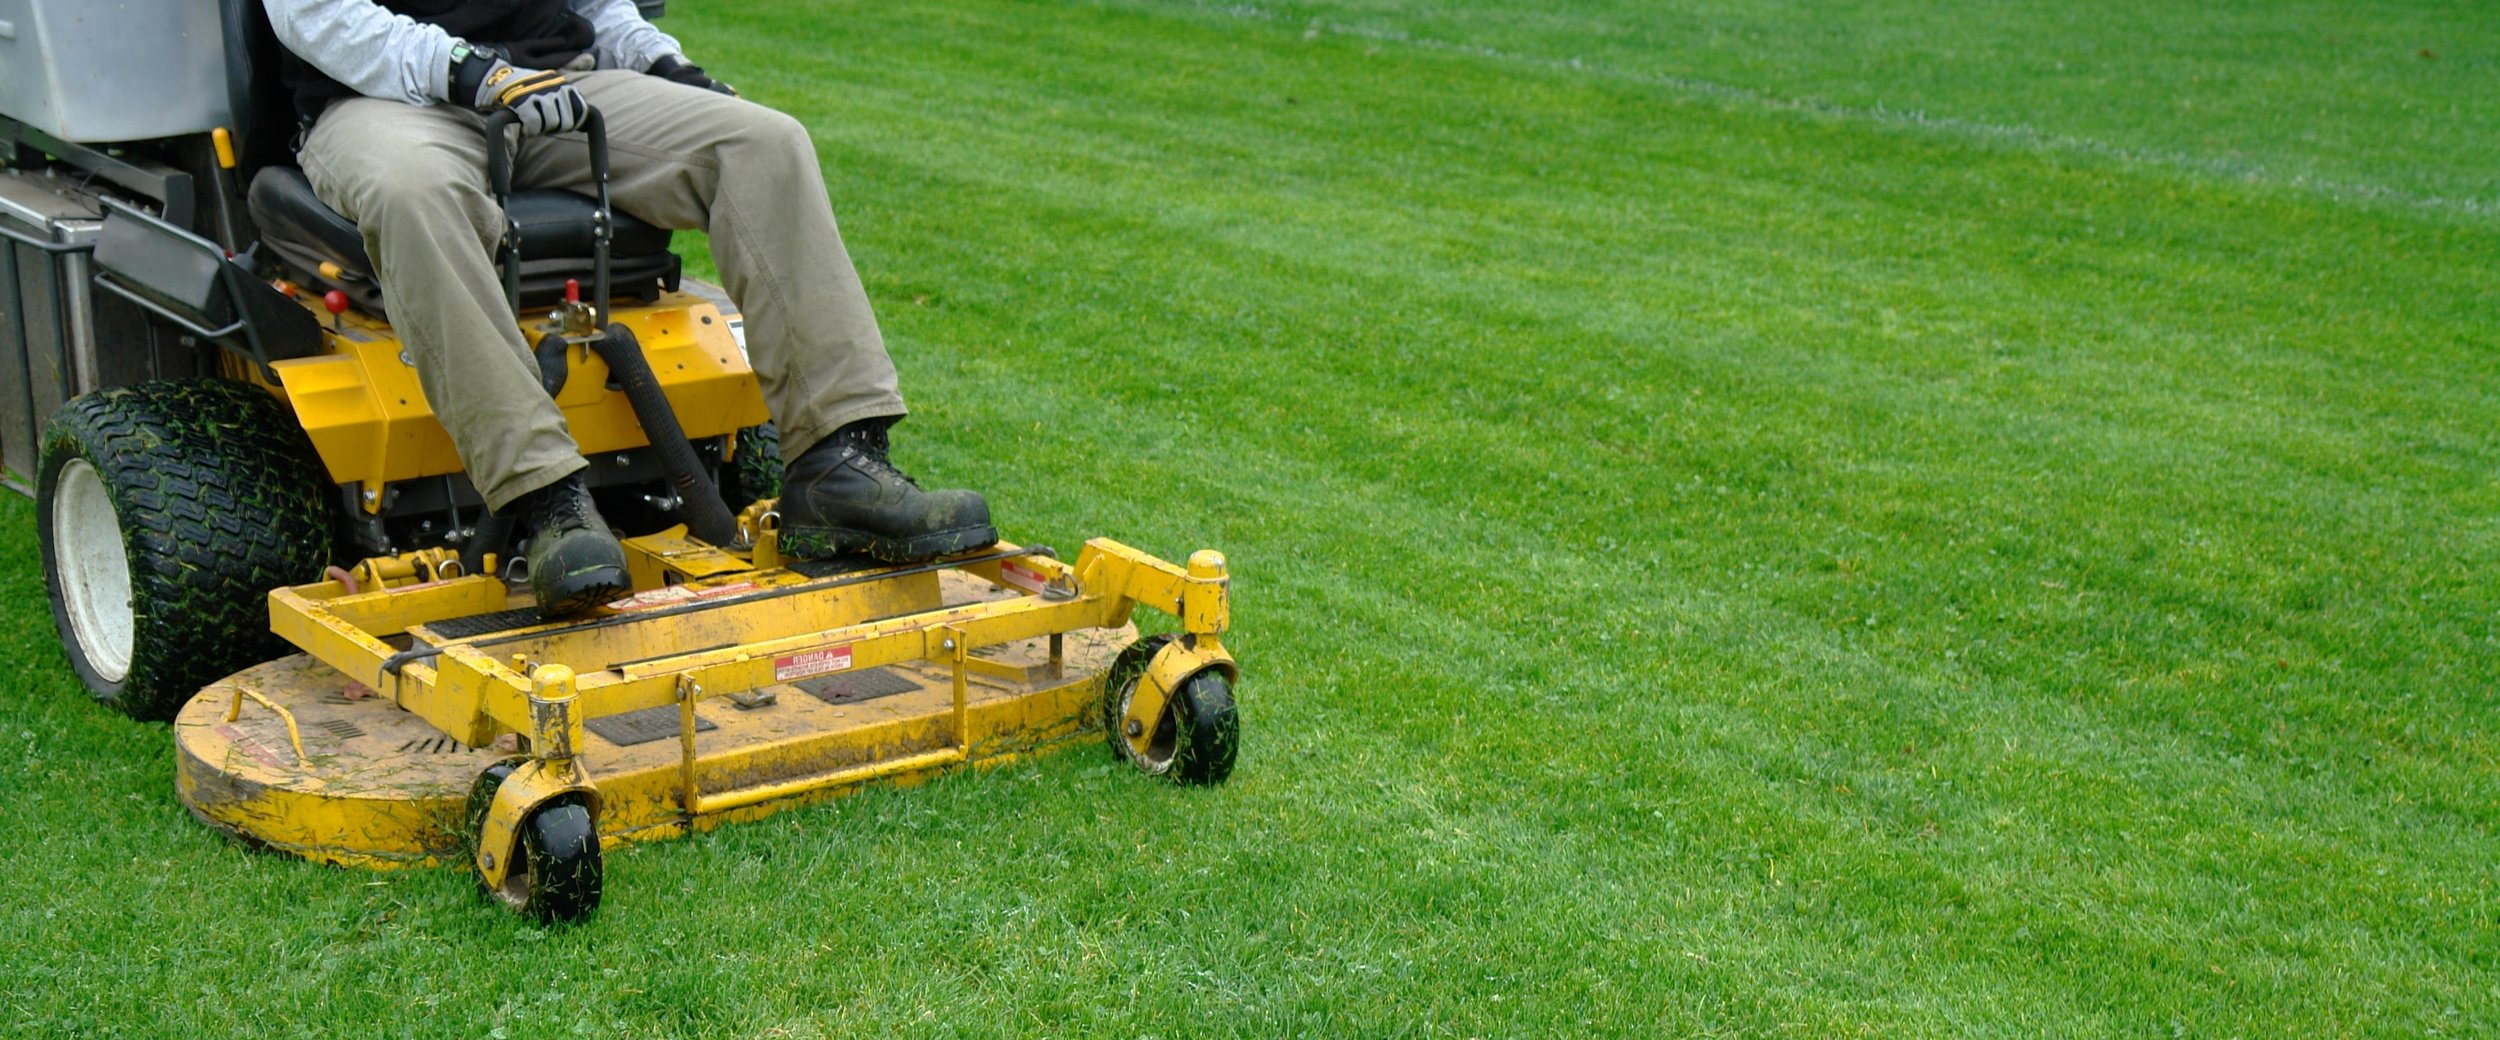 Monthly Lawn Services